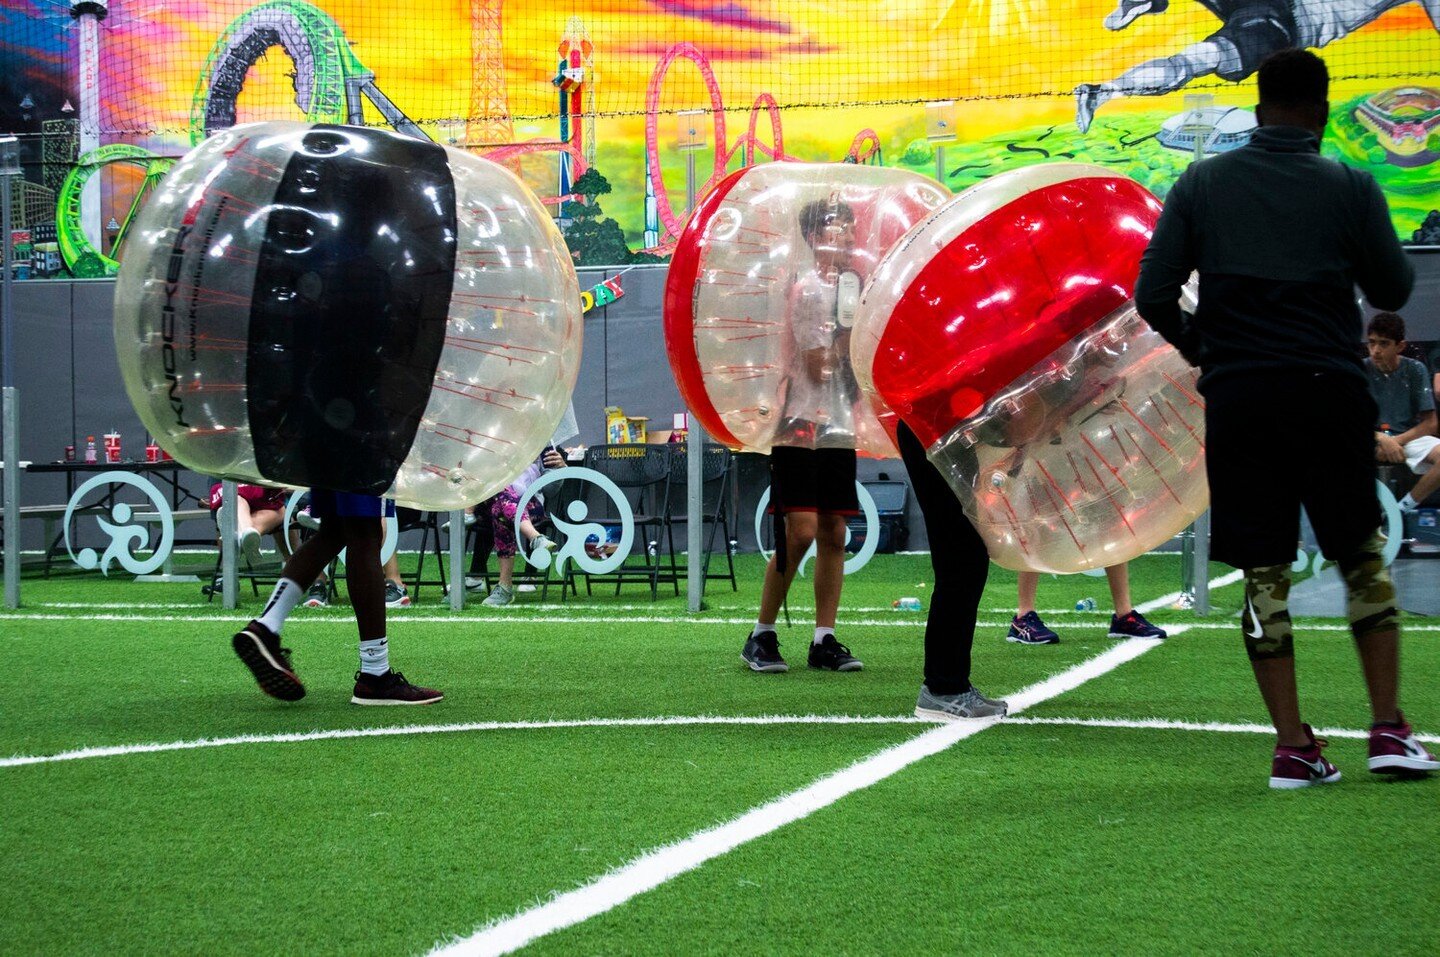 We know it's getting warm! That's no problem as we have plenty of indoor partners to keep you cool while you have a blast! Check out @motionindoor and their amazing facility and book your event today! #dfwknockerball #ban #bubblesoccer #dallas #bubbl